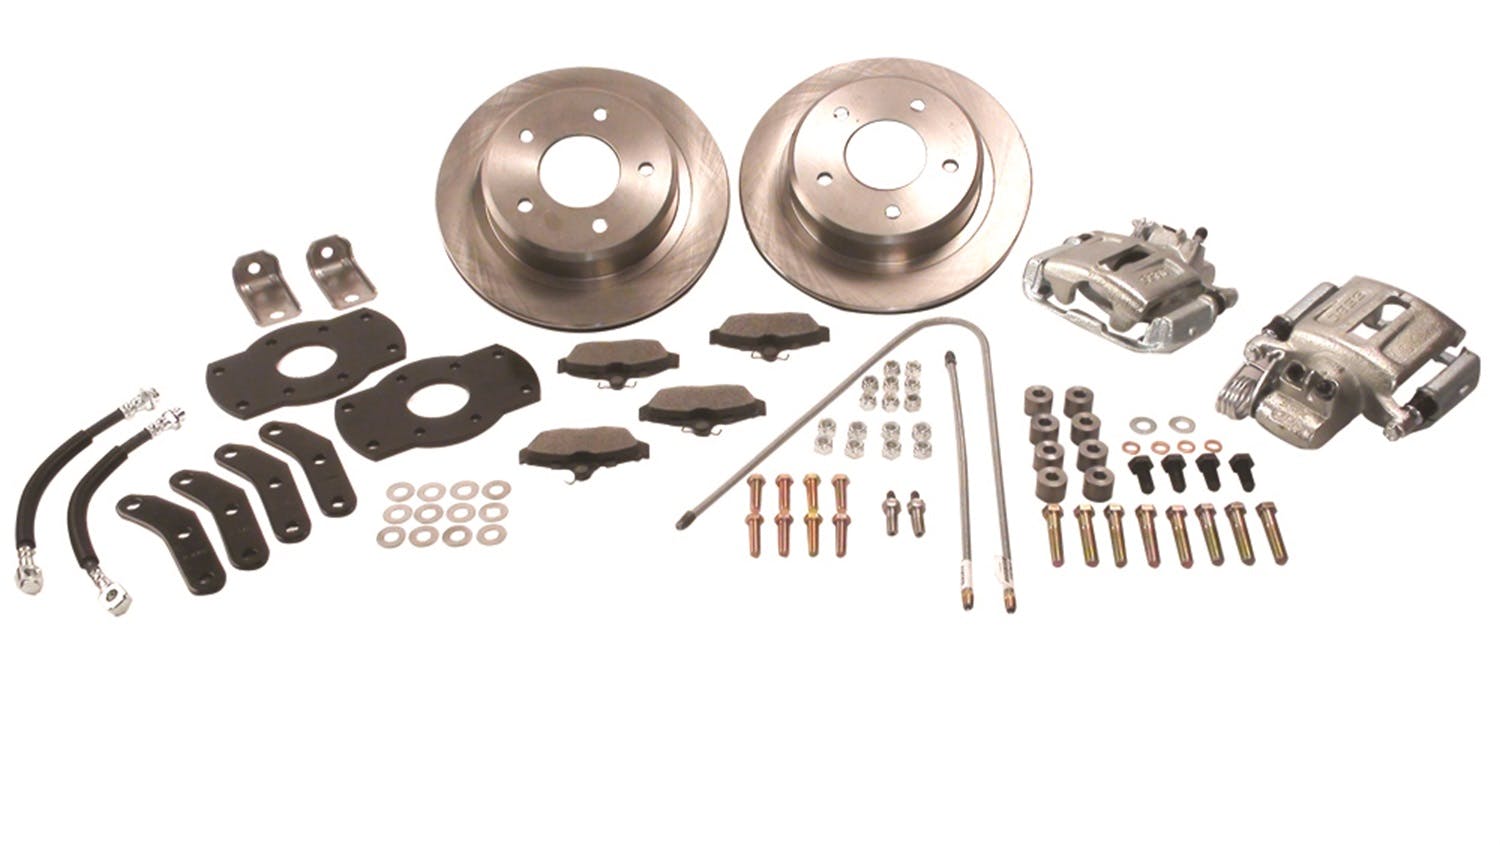 Stainless Steel Brakes A128R Kit A128 w/red calipers